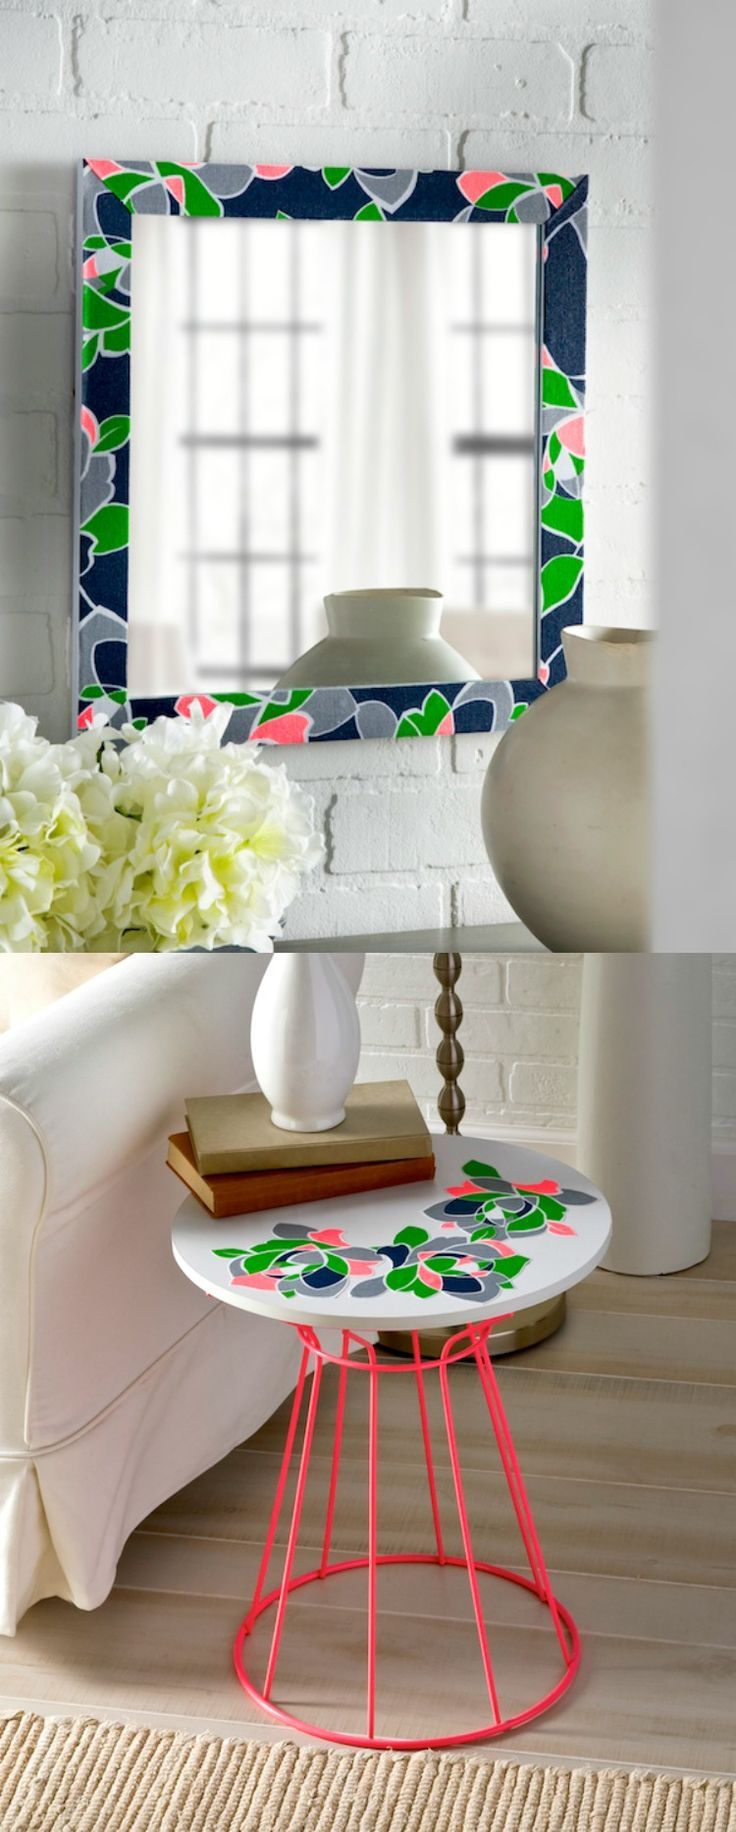 Learn how to revamp a mirror and a tabletop using Mod Podge - and a pillowcase!